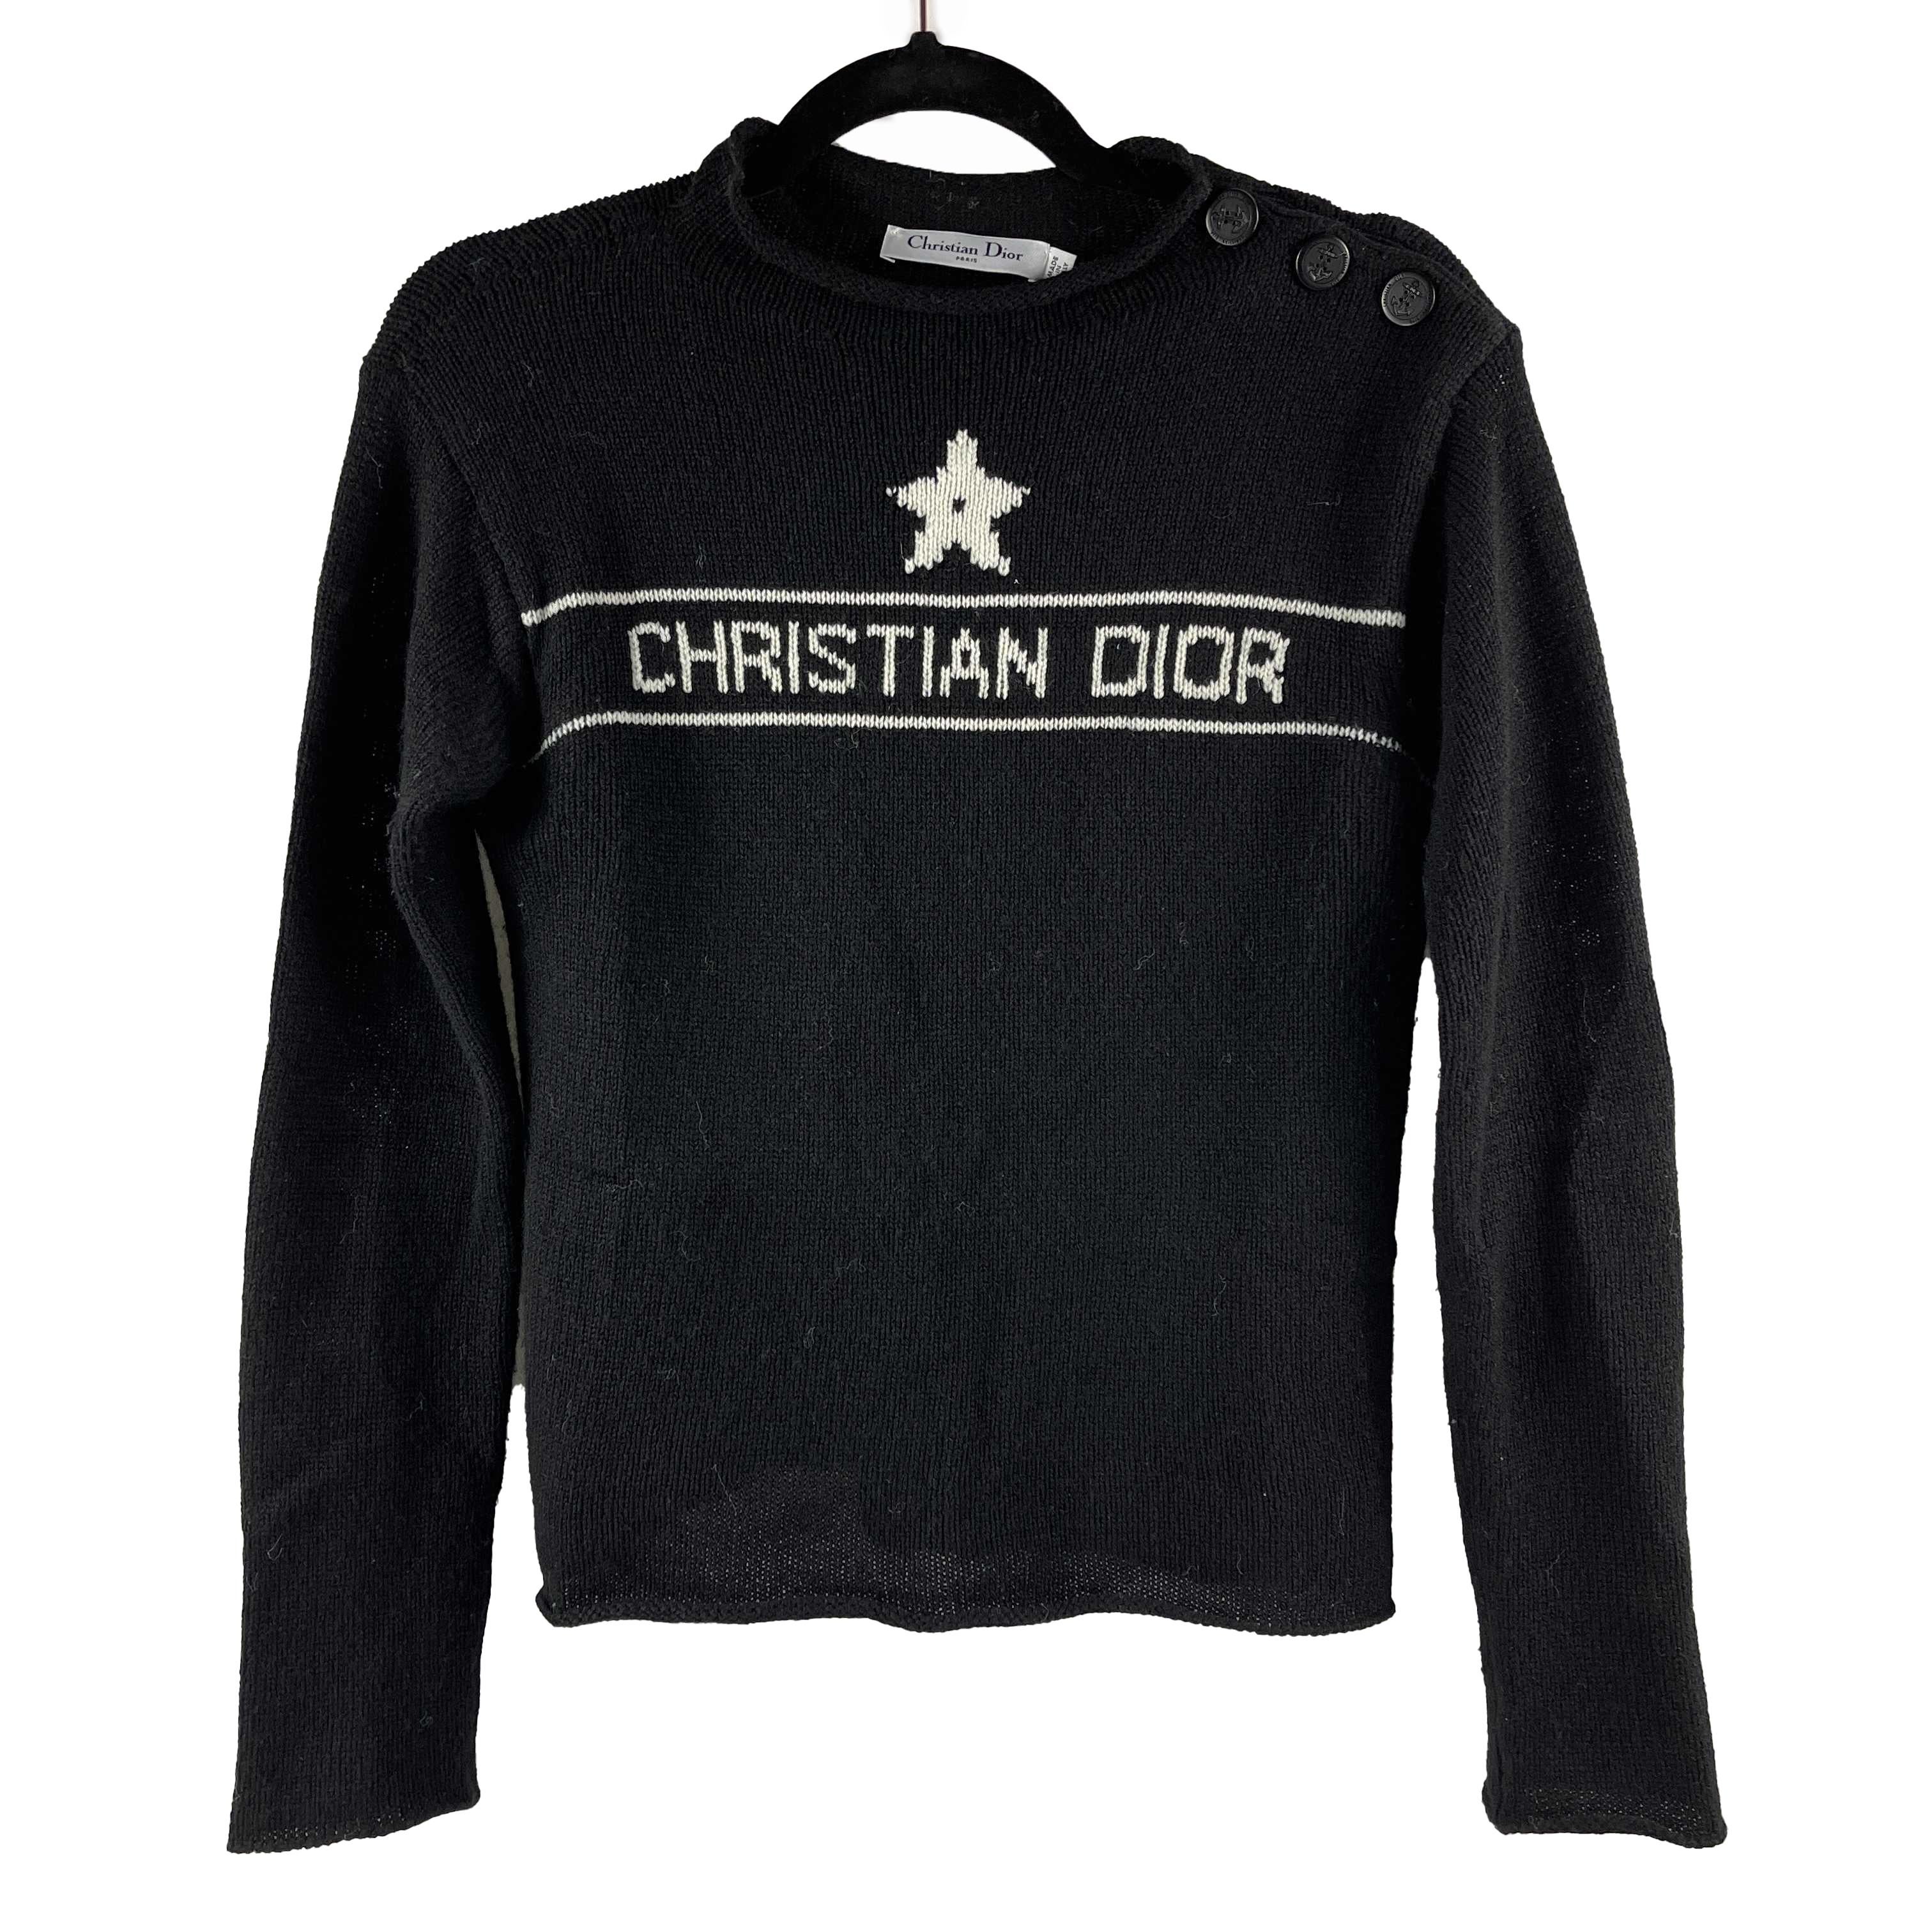 Christian Dior Embroidered Logo Knit Cashmere Sweater 34 US 2 1